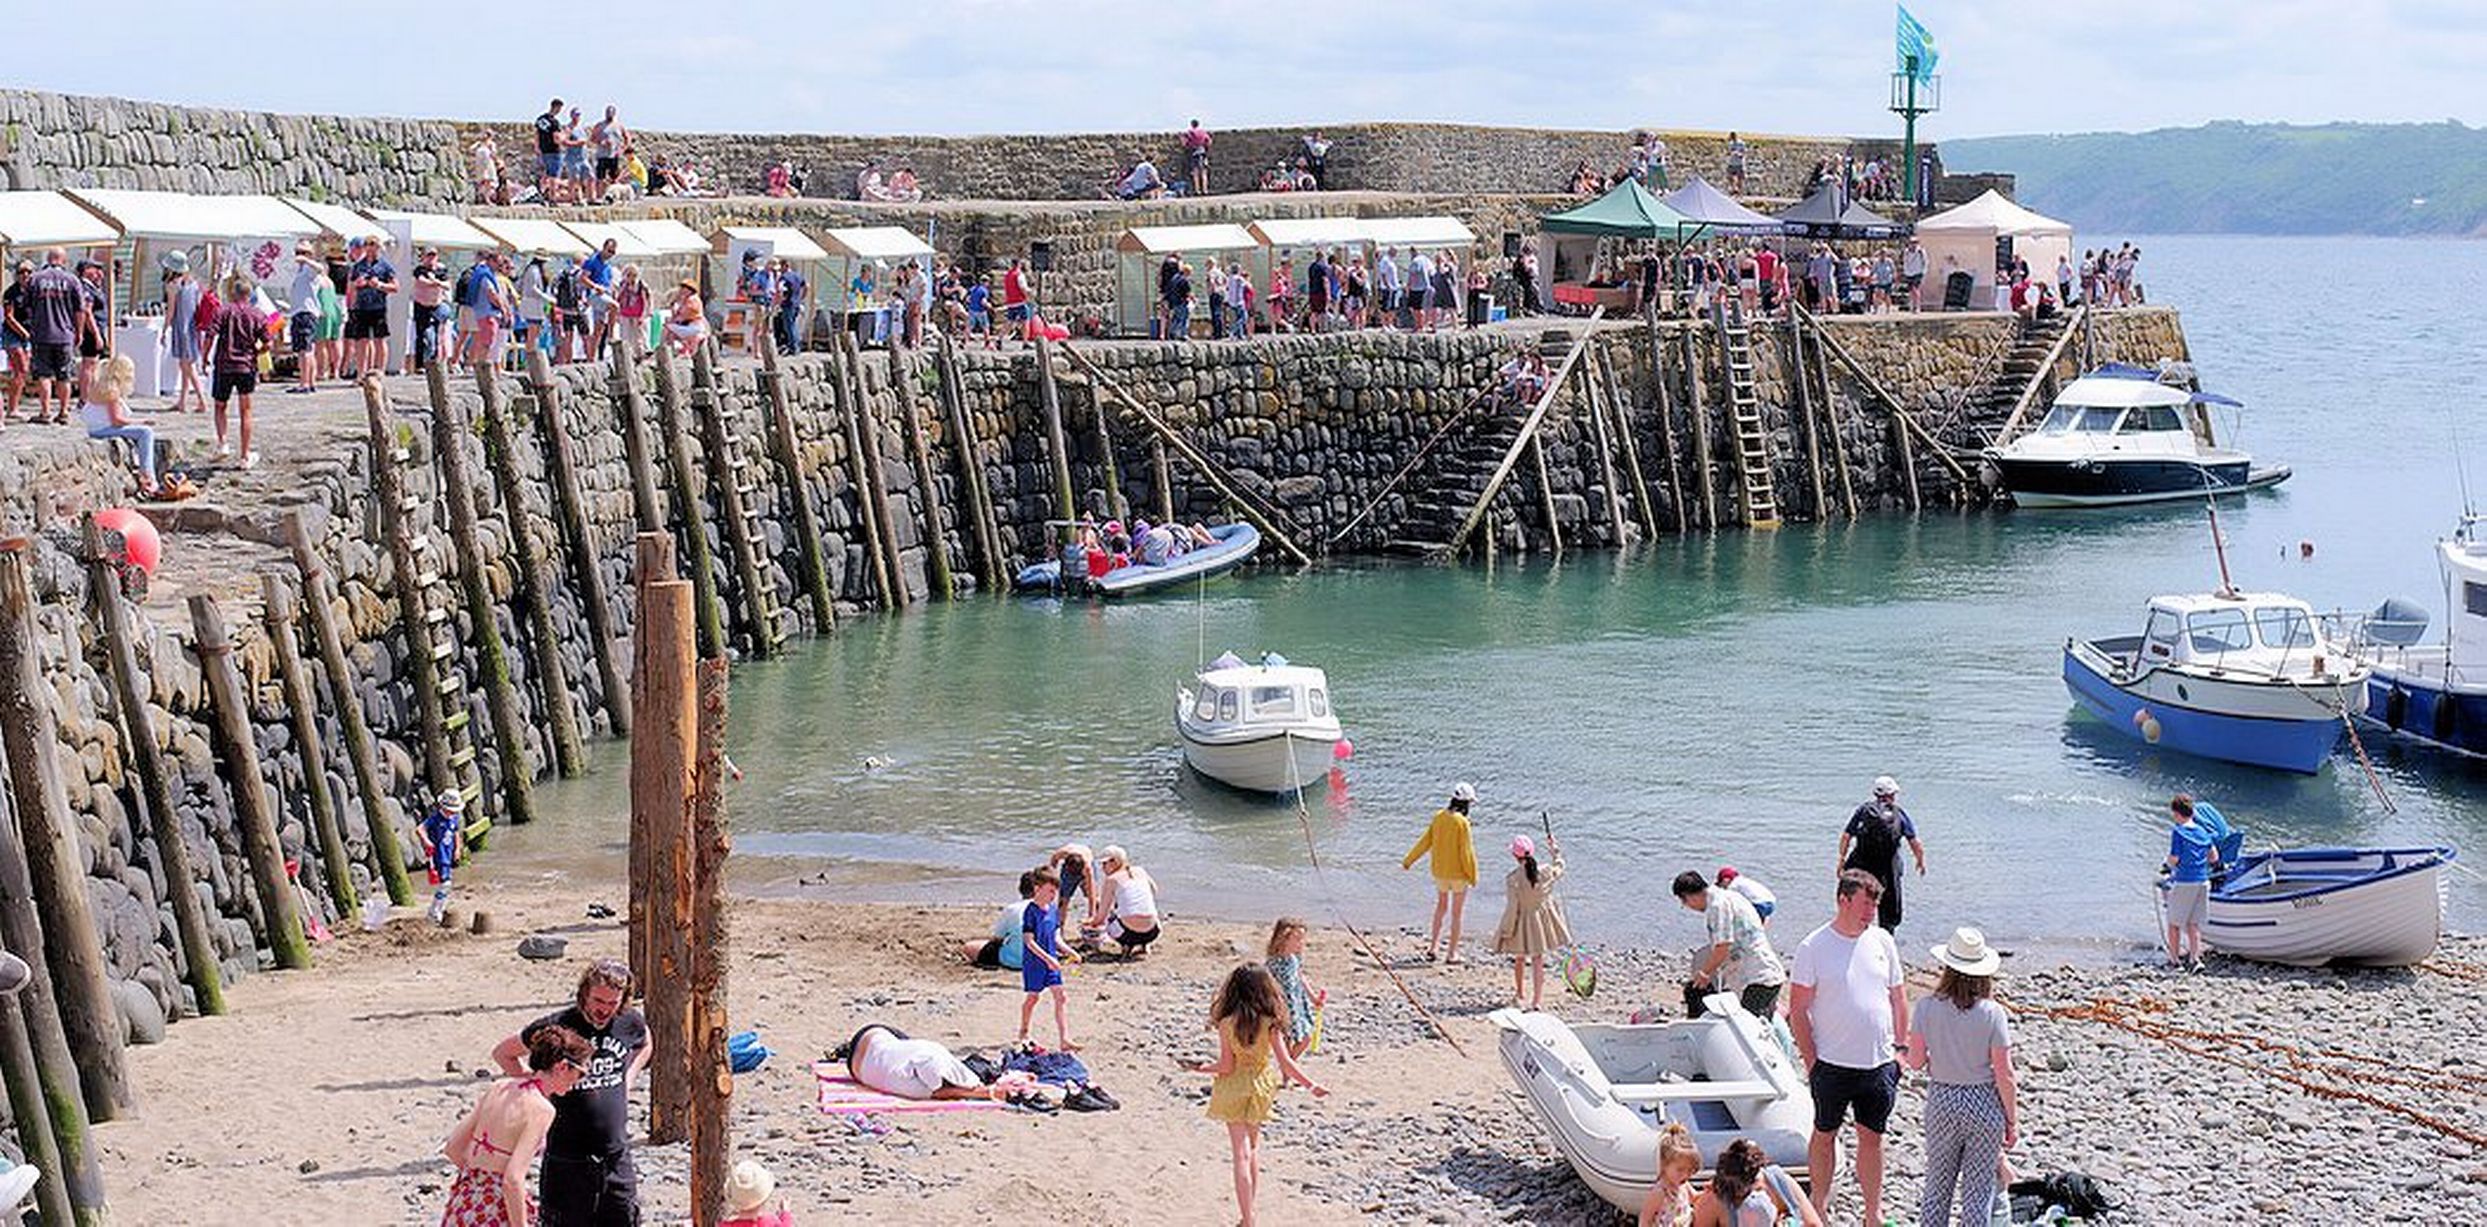 “The most beautiful seaside villages in the UK” – The Telegraph